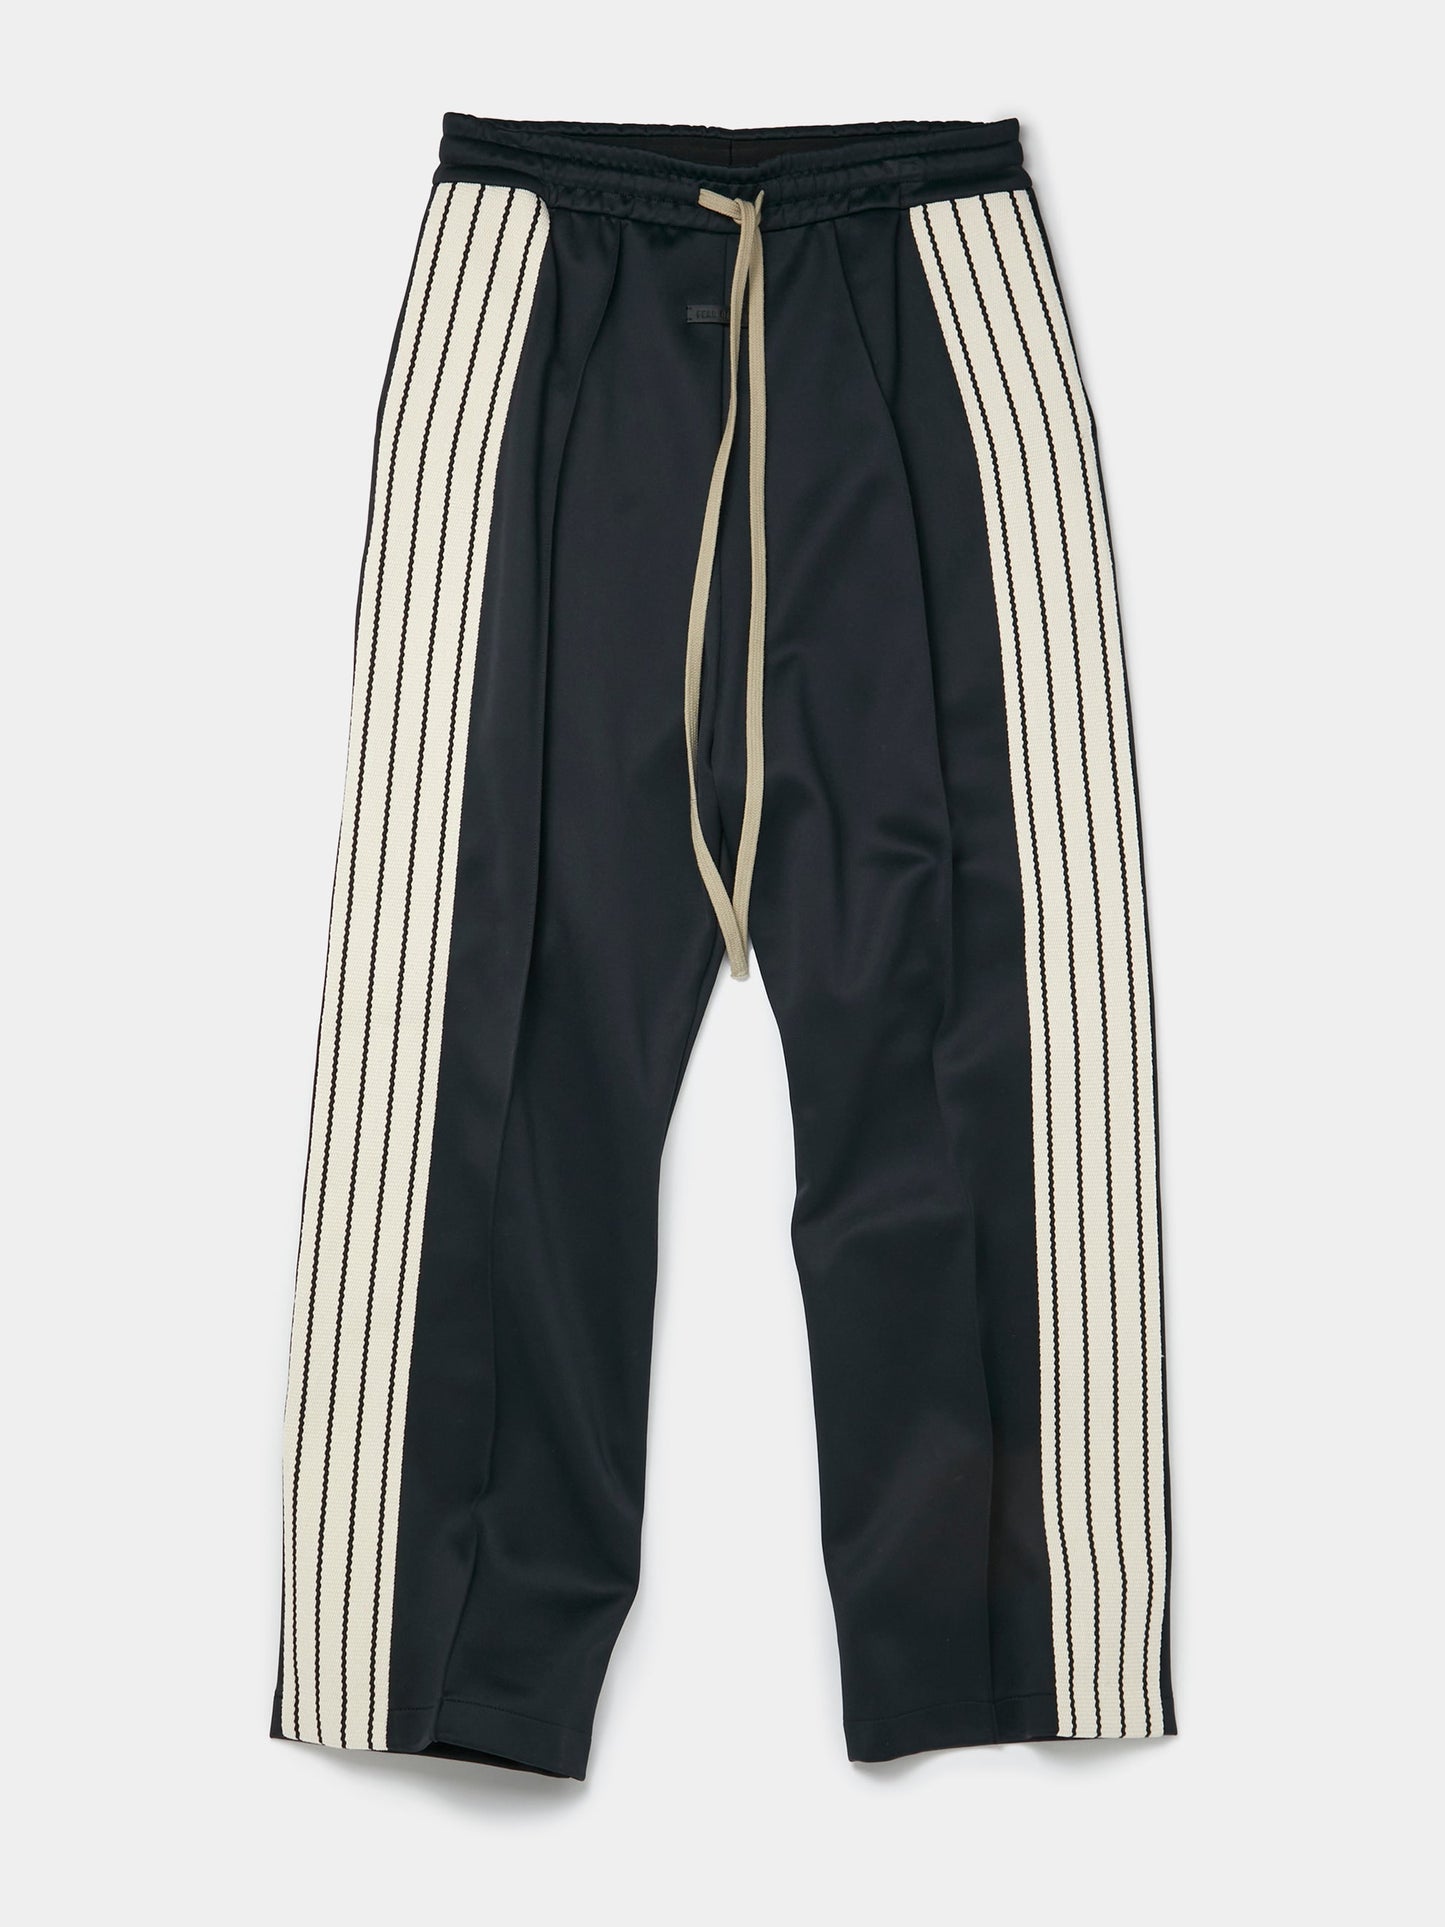 Pintuck and Stripe Relaxed Sweatpant (Black)